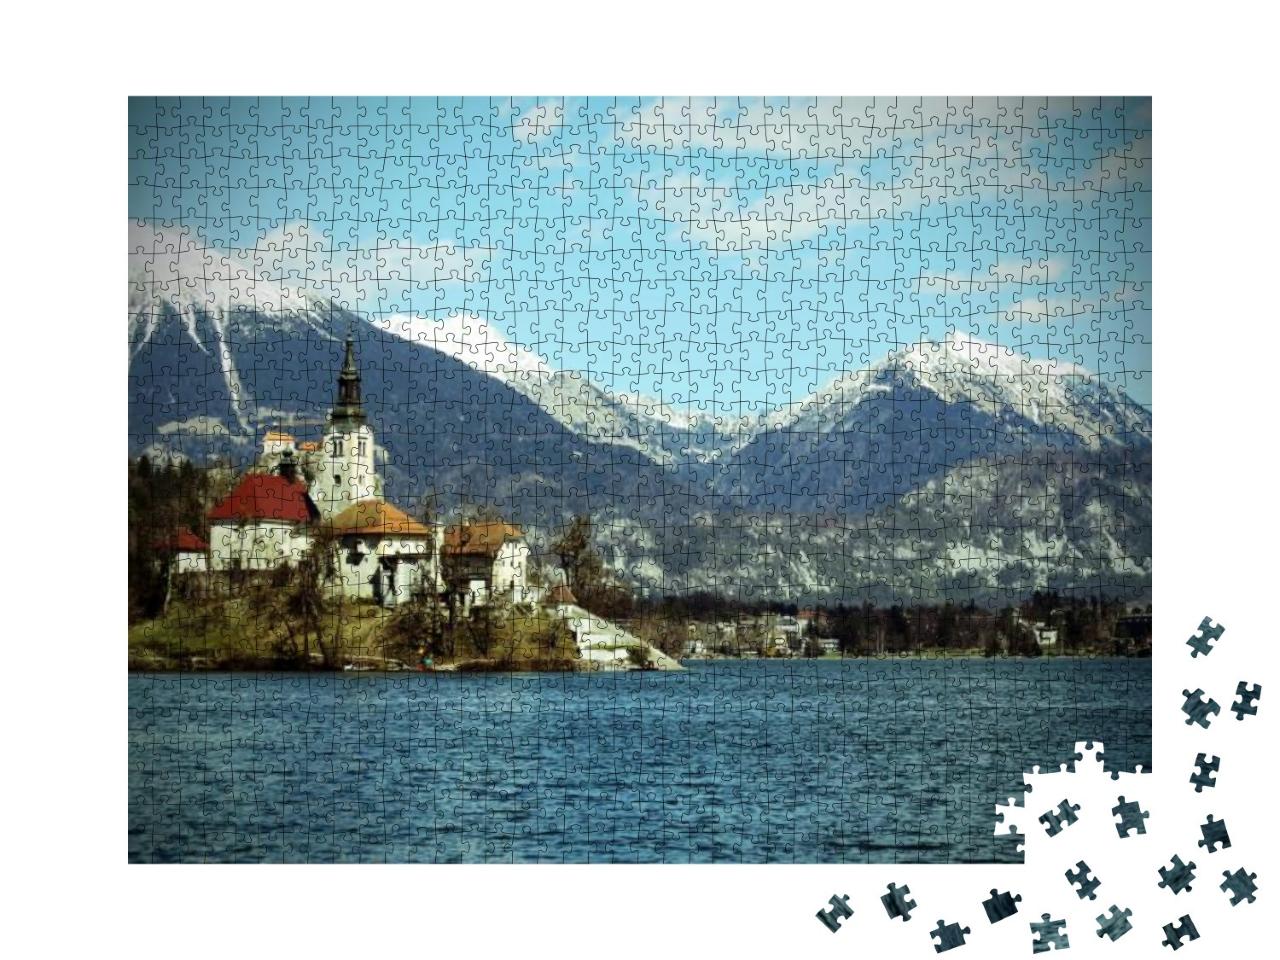 Church on the Island of Lake Bled in Slovenia & the Snowy... Jigsaw Puzzle with 1000 pieces